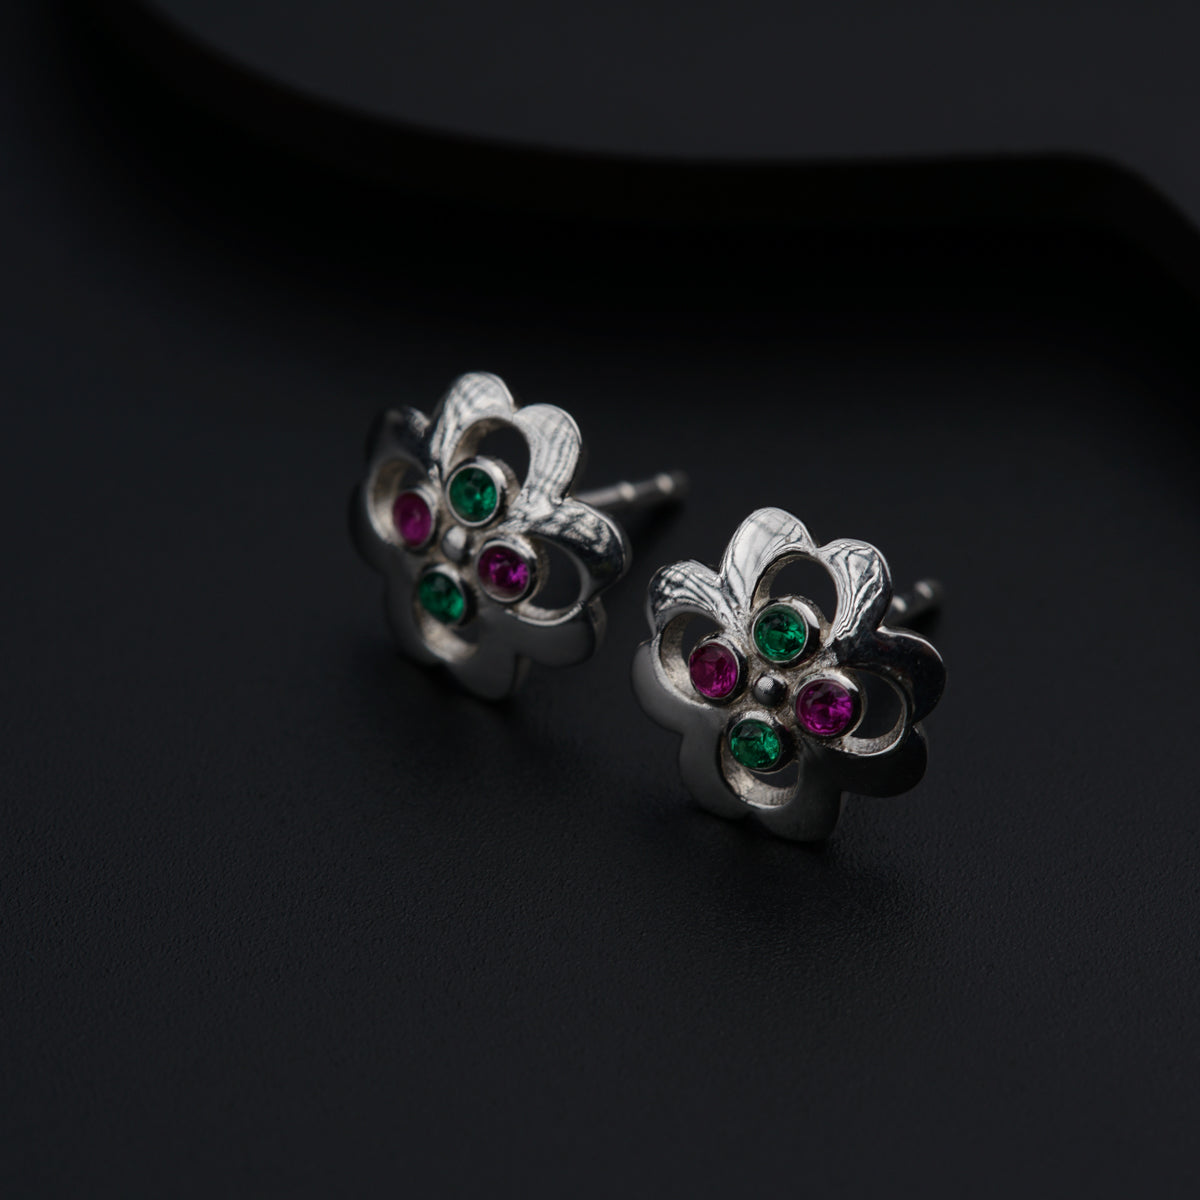 a pair of silver earrings with green and red stones